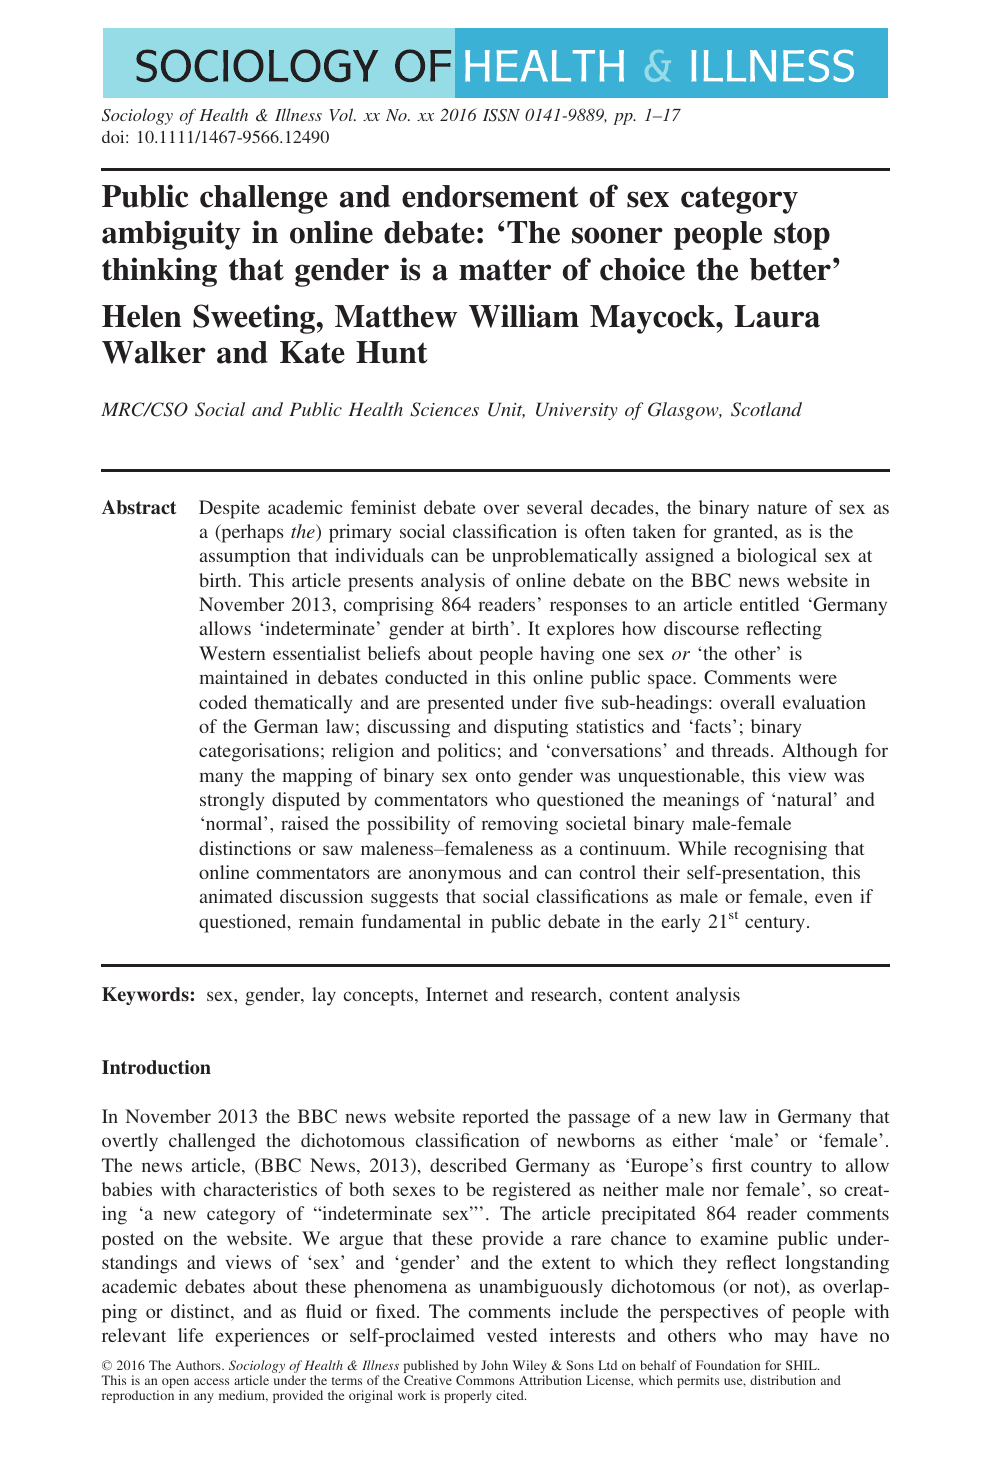 Public challenge and endorsement of sex category ambiguity in online debate The sooner people stop thinking that gender is a matter of choice the better photo image